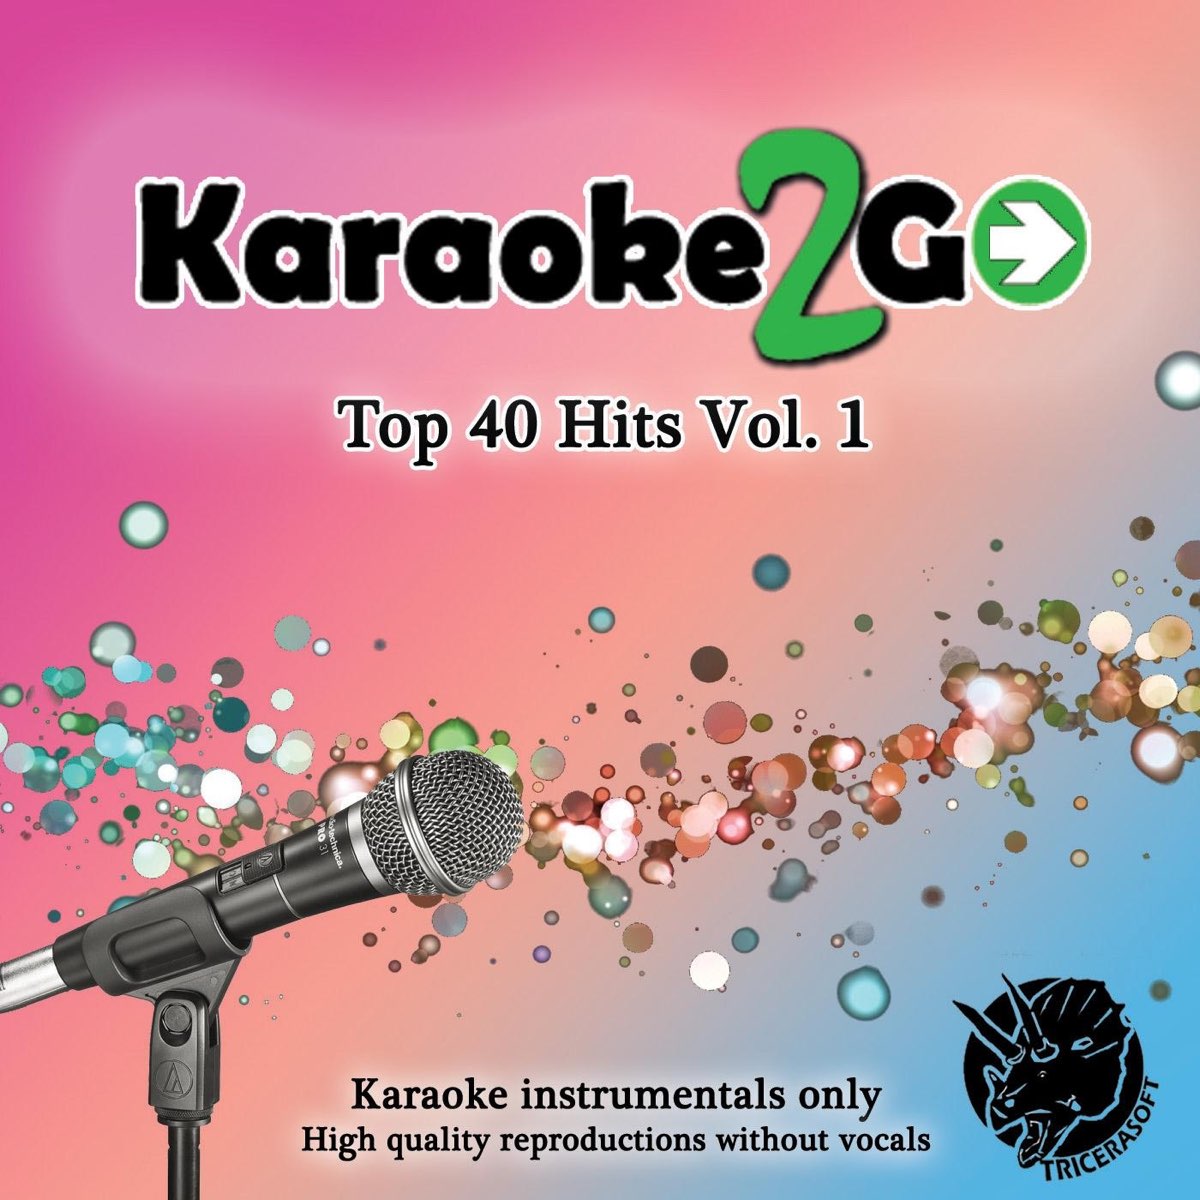 Stay with me караоке. Njoy караоке. Караоке 2 * 2 4. Karaoke go